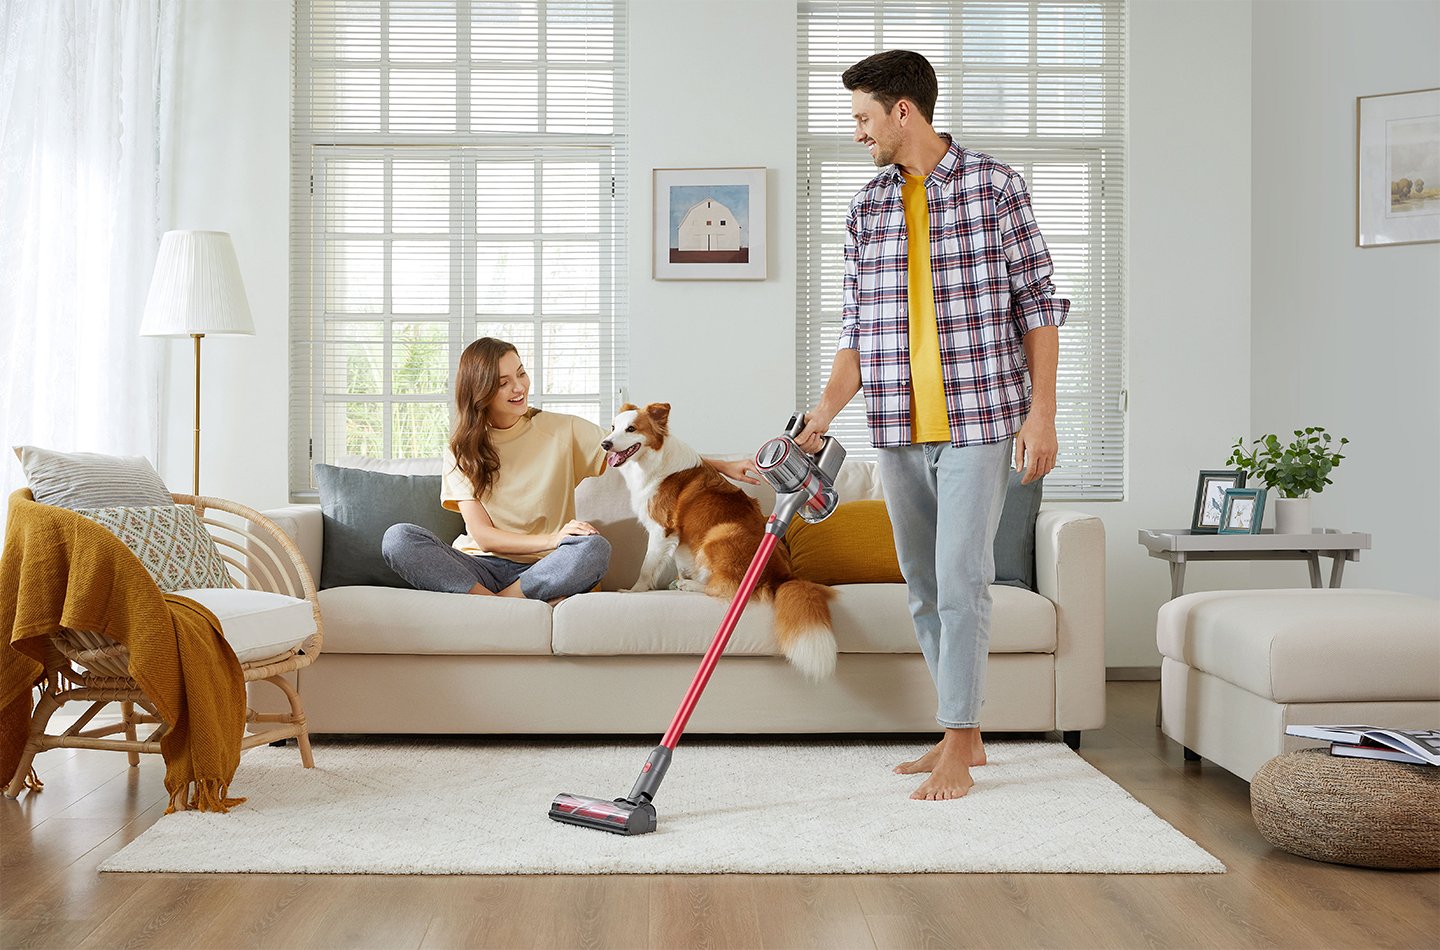 Roborock H7: Long Lasting Cleaning Power. Easier than Ever.